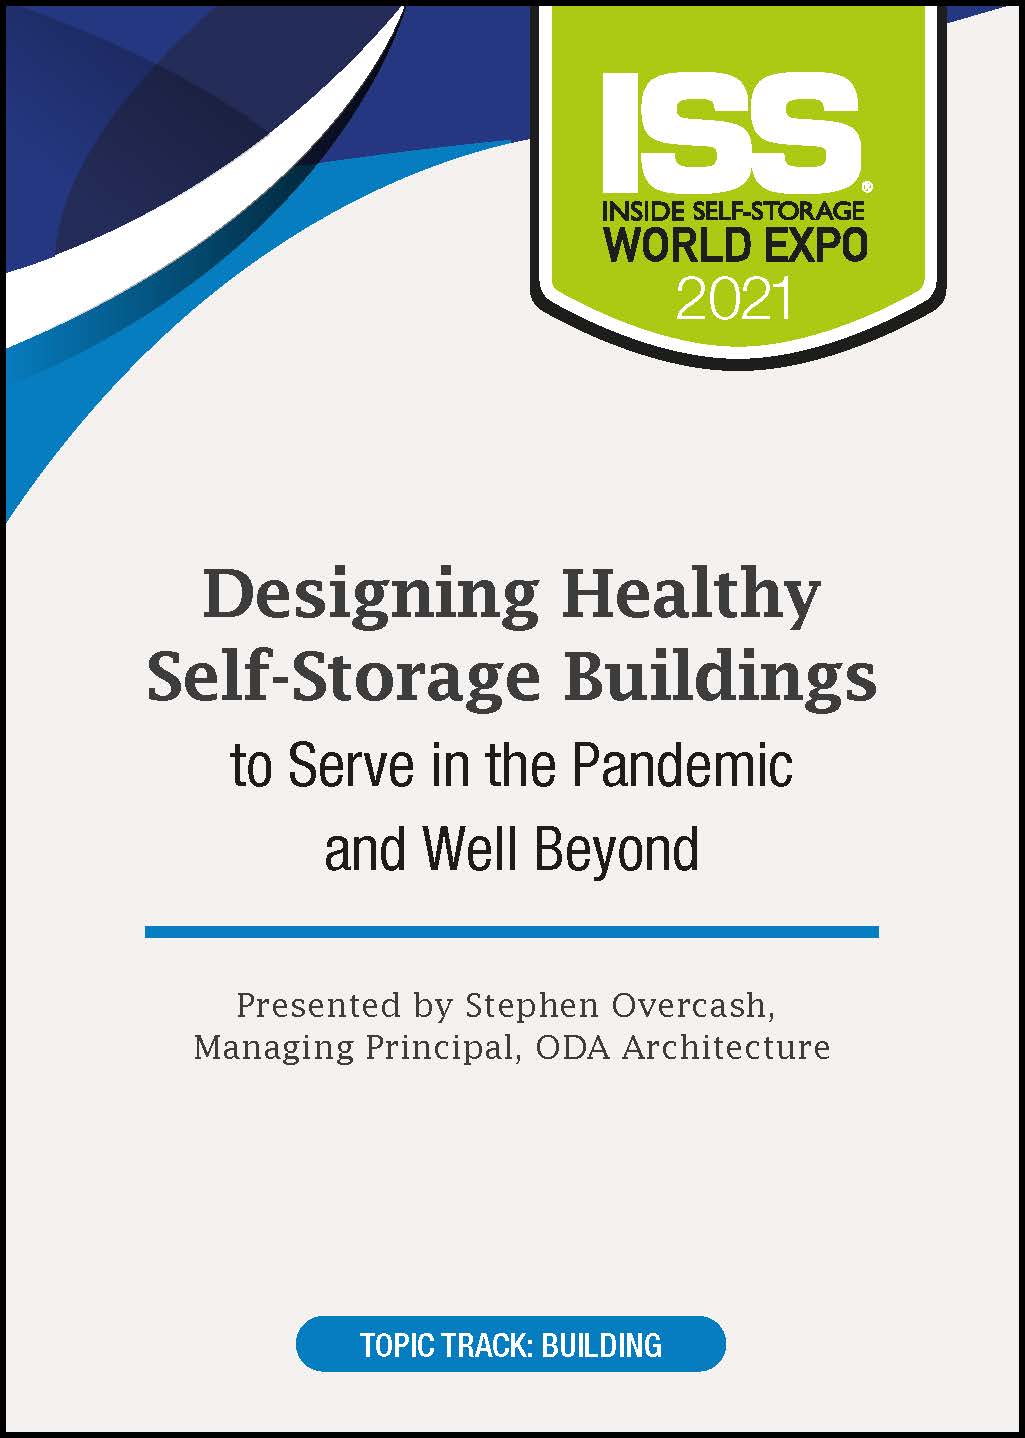 Designing Healthy Self-Storage Buildings to Serve in the Pandemic and Well Beyond